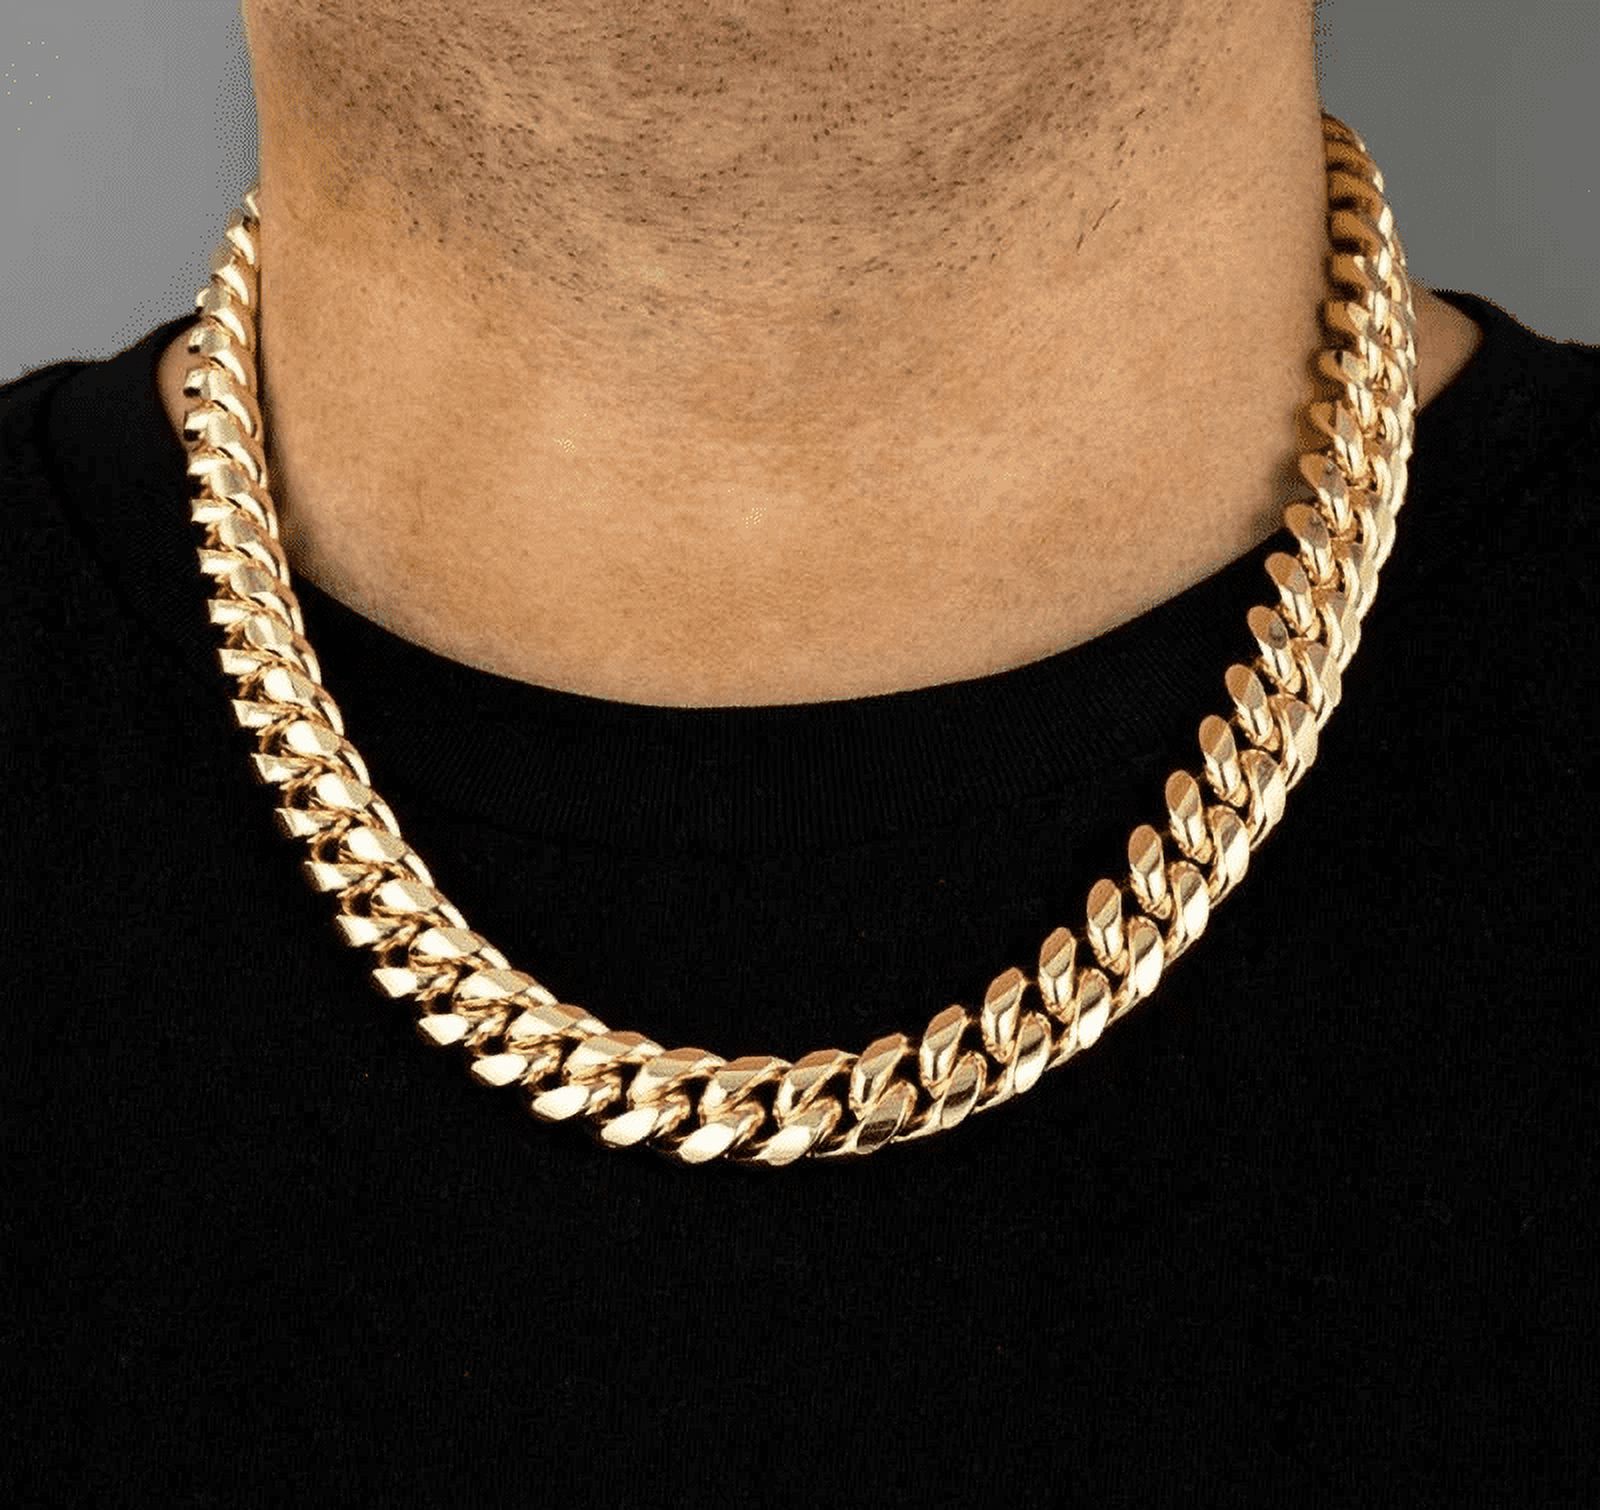 14MM Gold Chain 24K Miami Cuban link Curb Necklace for Men Boys Fathers Husband Perfect gift Hip Hop Rapper Chain - image 3 of 9